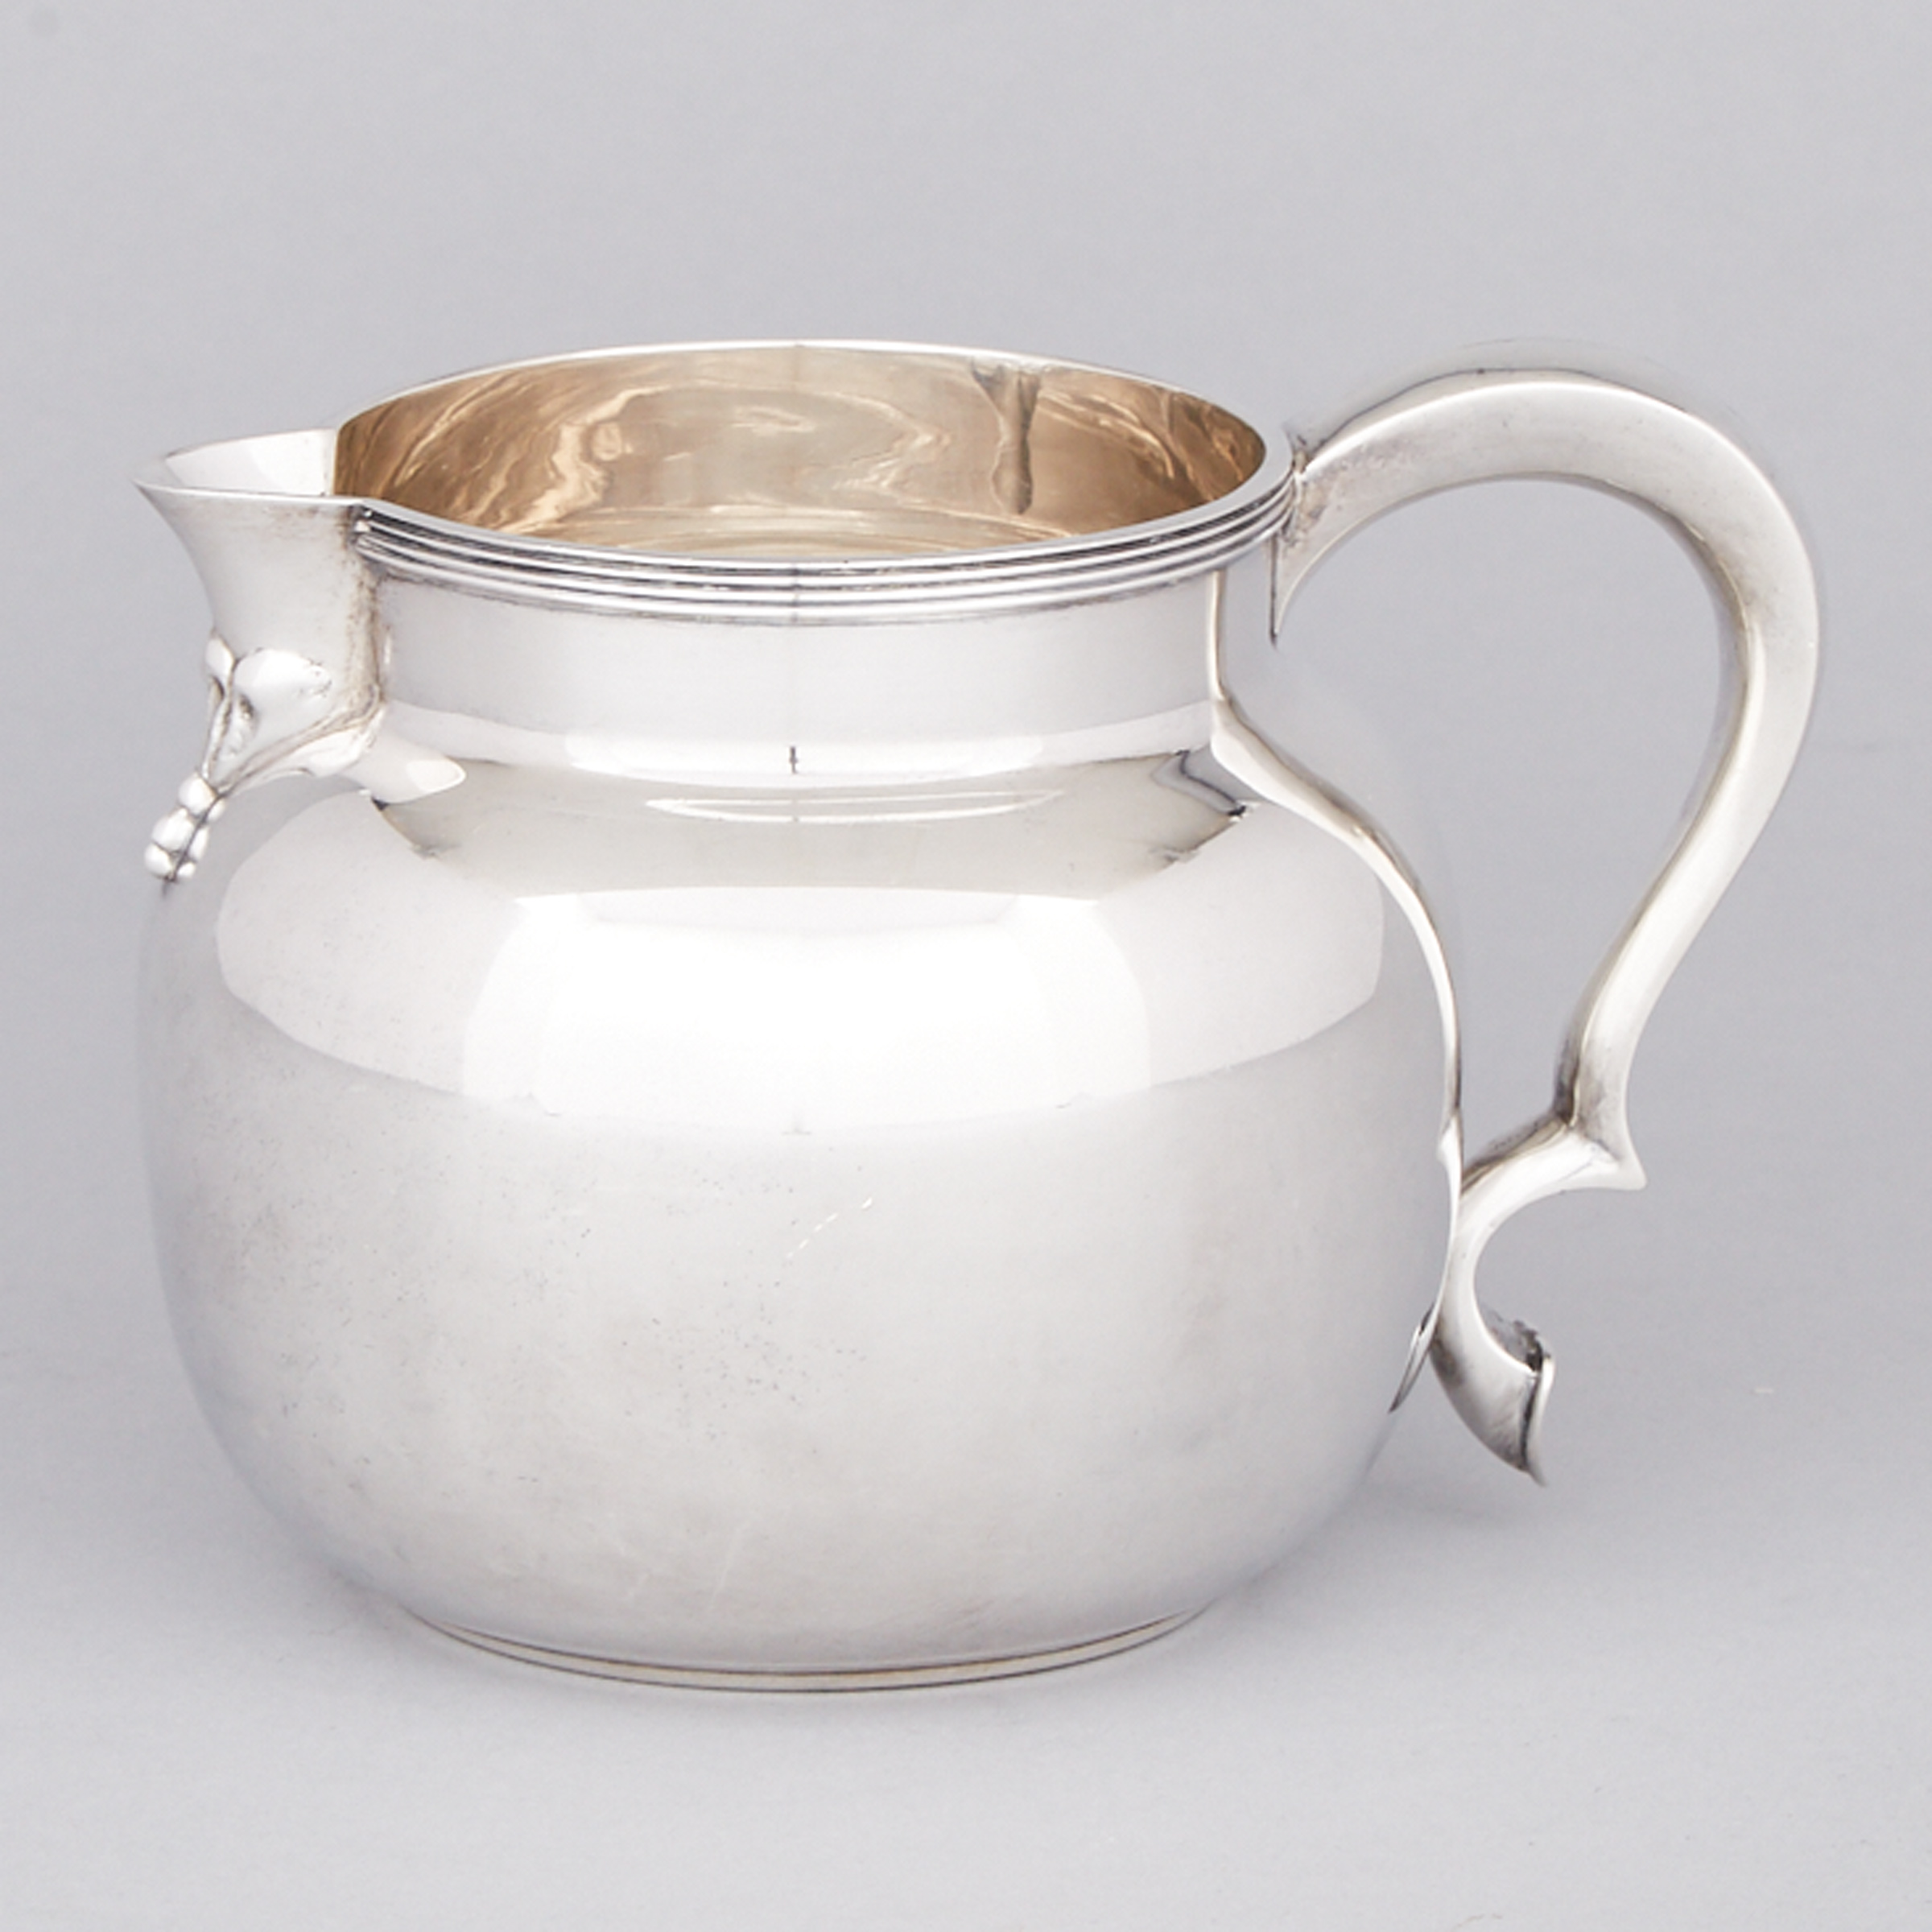 Canadian Silver Water Jug, Henry Birks & Sons, Montreal, Que., 1935